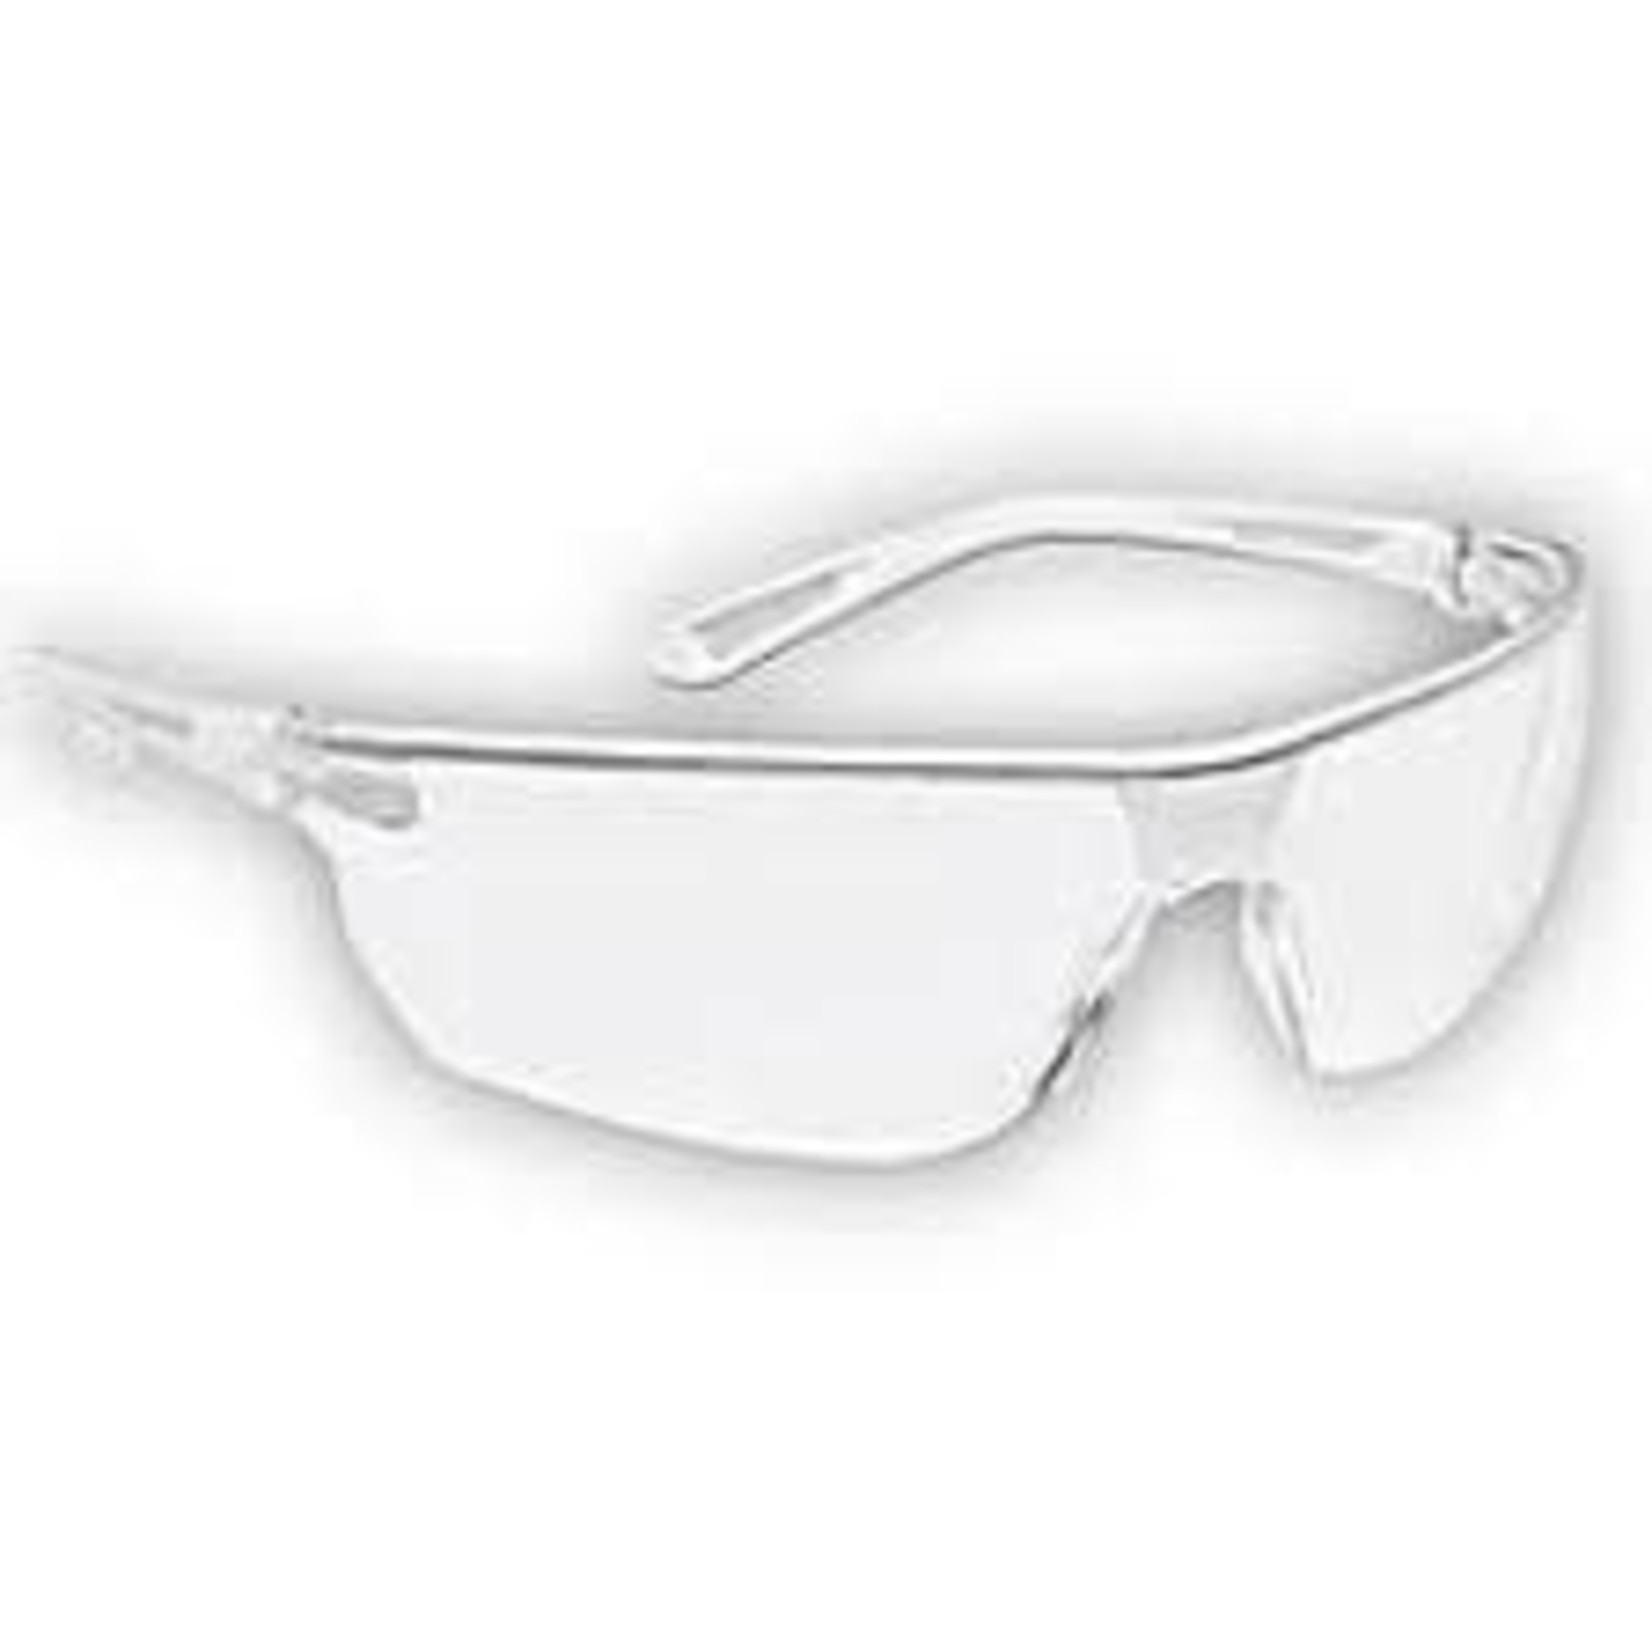 Uline Hawk Air Safety Glasses/Goggles